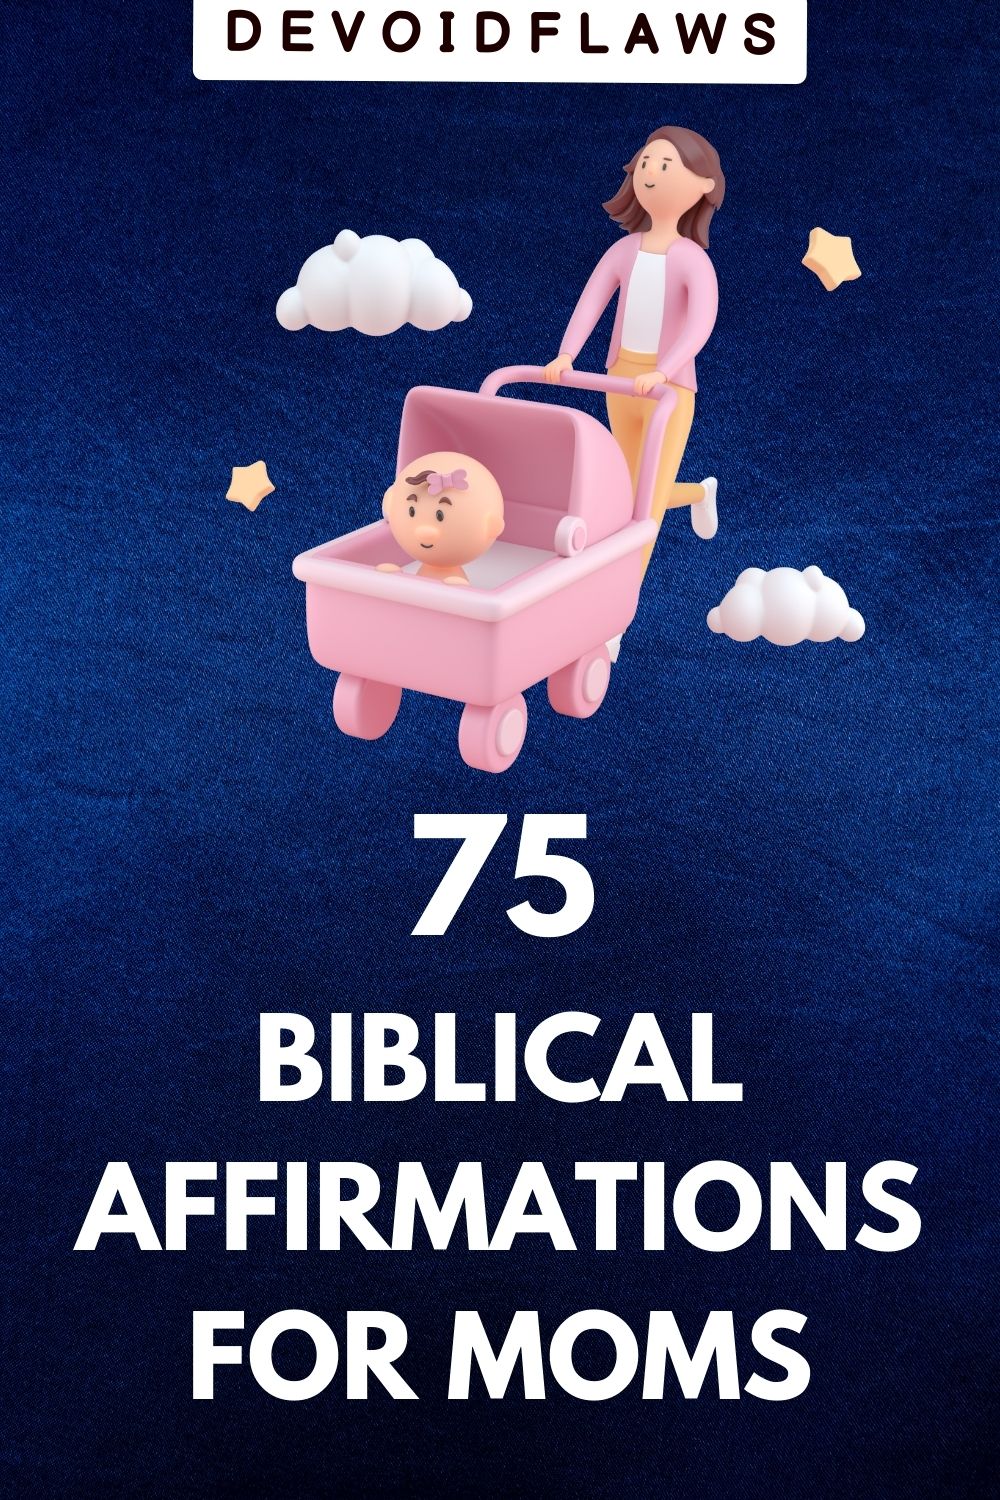 blue background image with text - 75 biblical affirmations for moms